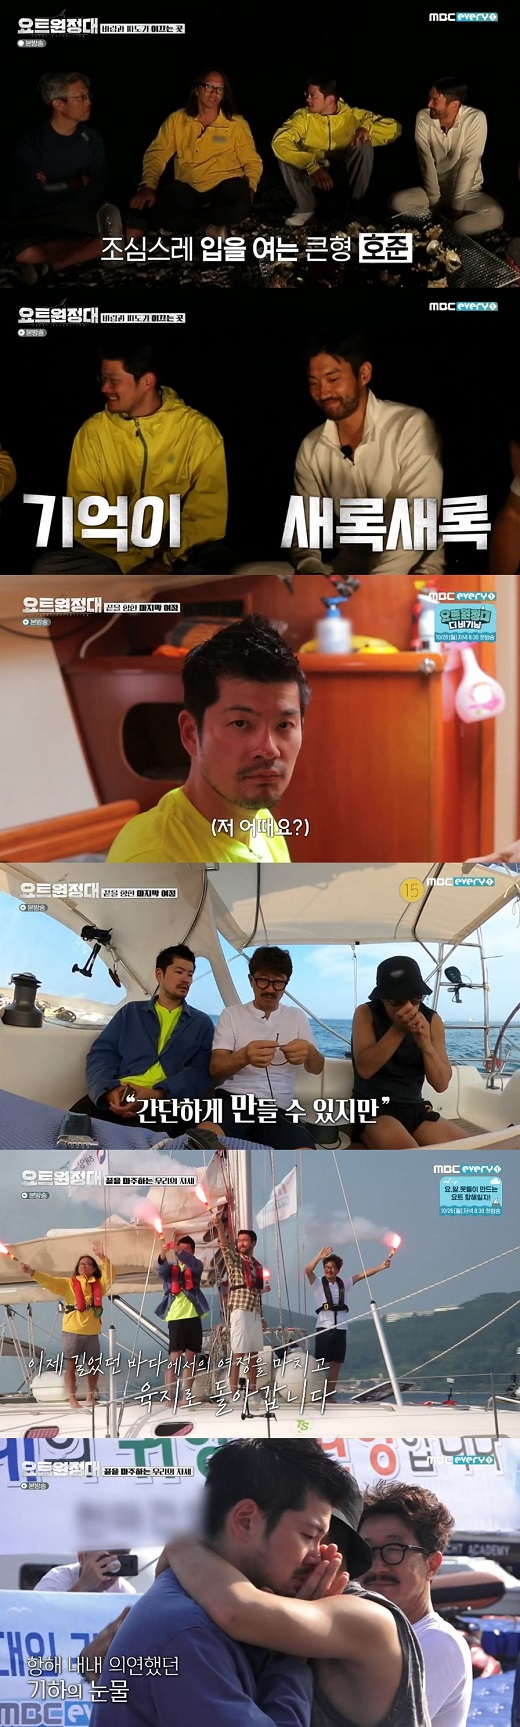 The Yacht Expedition ended the grand finale.On the afternoon of the 19th, MBC Everlon Yot Expedition was the last Summertime of actor Jin Goo, singer and actor Choi Siwon, Singer Chang Kiha and writer Song Ho-joon.On the 12th day of the voyage, the crew headed to the sound road, called the Treasure Island, where there were long traces of time engraved throughout the cave.Song Ho-joon was able to appreciate the scenery with the base of the director of the filming, although he was unable to secure the view due to impurities, and he was able to appreciate the scenery.Then I experienced climbing the mast to the top of the yacht. Captain Kim Seung-jin said, I think it is the best learning to experience it with your body.It is a way to ride the outer line using the juma ring used for climbing. I want to teach you how to climb the top of the mast. The first Top Model Chang Kiha climbed to the top of the mast and shouted Long Live, while Jin Goo showed a hand-shaking ease without a hint of fear.I heard it was the orthodox of the yacht, I was not afraid to go up to whether I was close to the yacht or the sea, Jin Goo told the production team.The ship party was held. Captain Kim Seung-jin and team doctor Lim Soo-bin, who were on the meal line, prepared seaweed soup without knowing the crew.Song Ho-joon, who received Choi Siwons Gift, laughed brightly, saying, Thank you all, the celebration was unfolded.I do not know how to operate the yacht, Chang Kiha said. Even if I did not do well, there was no problem with the voyage.I reaffirmed that I was a scarce man, but I was glad that I could live with someone else and live a life without Mask.I thought of a friend on land, he confessed.Every yacht can ride, but no one can ride, and if you are vigilant, you get hurt a lot, said Jin Goo, every day was hard: every time our member was a treasure.I would have been afraid when I first started. I would have felt a sense of discomfort when I returned. It was a great help because there was a thing that covered my fears. Captain Kim also mentioned the port of the paper cell, saying, The first and the end of the voyage are the most important.We will go to the daytime, but we will be careful about watching and go safely. After cleaning the yacht, they prepared a headline for the port of entry. Choi Siwon grooms Chang Kihas hairstyle and shows off his bromance chemistry.On the Hermagor-Presseger See, which unfolded before his eyes, Jin Goo said: It was like going to the army and going on my first vacation, it was grieving and clunky.The port I saw when I left the port of Hermagor-Pressegger See and the port I saw when I went back were too different. Chang Kiha, who stepped on the land after 17 days of summertime, said, I wanted to rest quickly until I saw Hermagor-Presseger See, but I was cluttered with the banners and welcome.I had a feeling of rising. Song Ho-joon also said, I was happy to be with good people. Meanwhile, Yot Expedition: The Big Ning, the second season of Yot Expedition, will be broadcasted at 8:30 pm on the 26th.